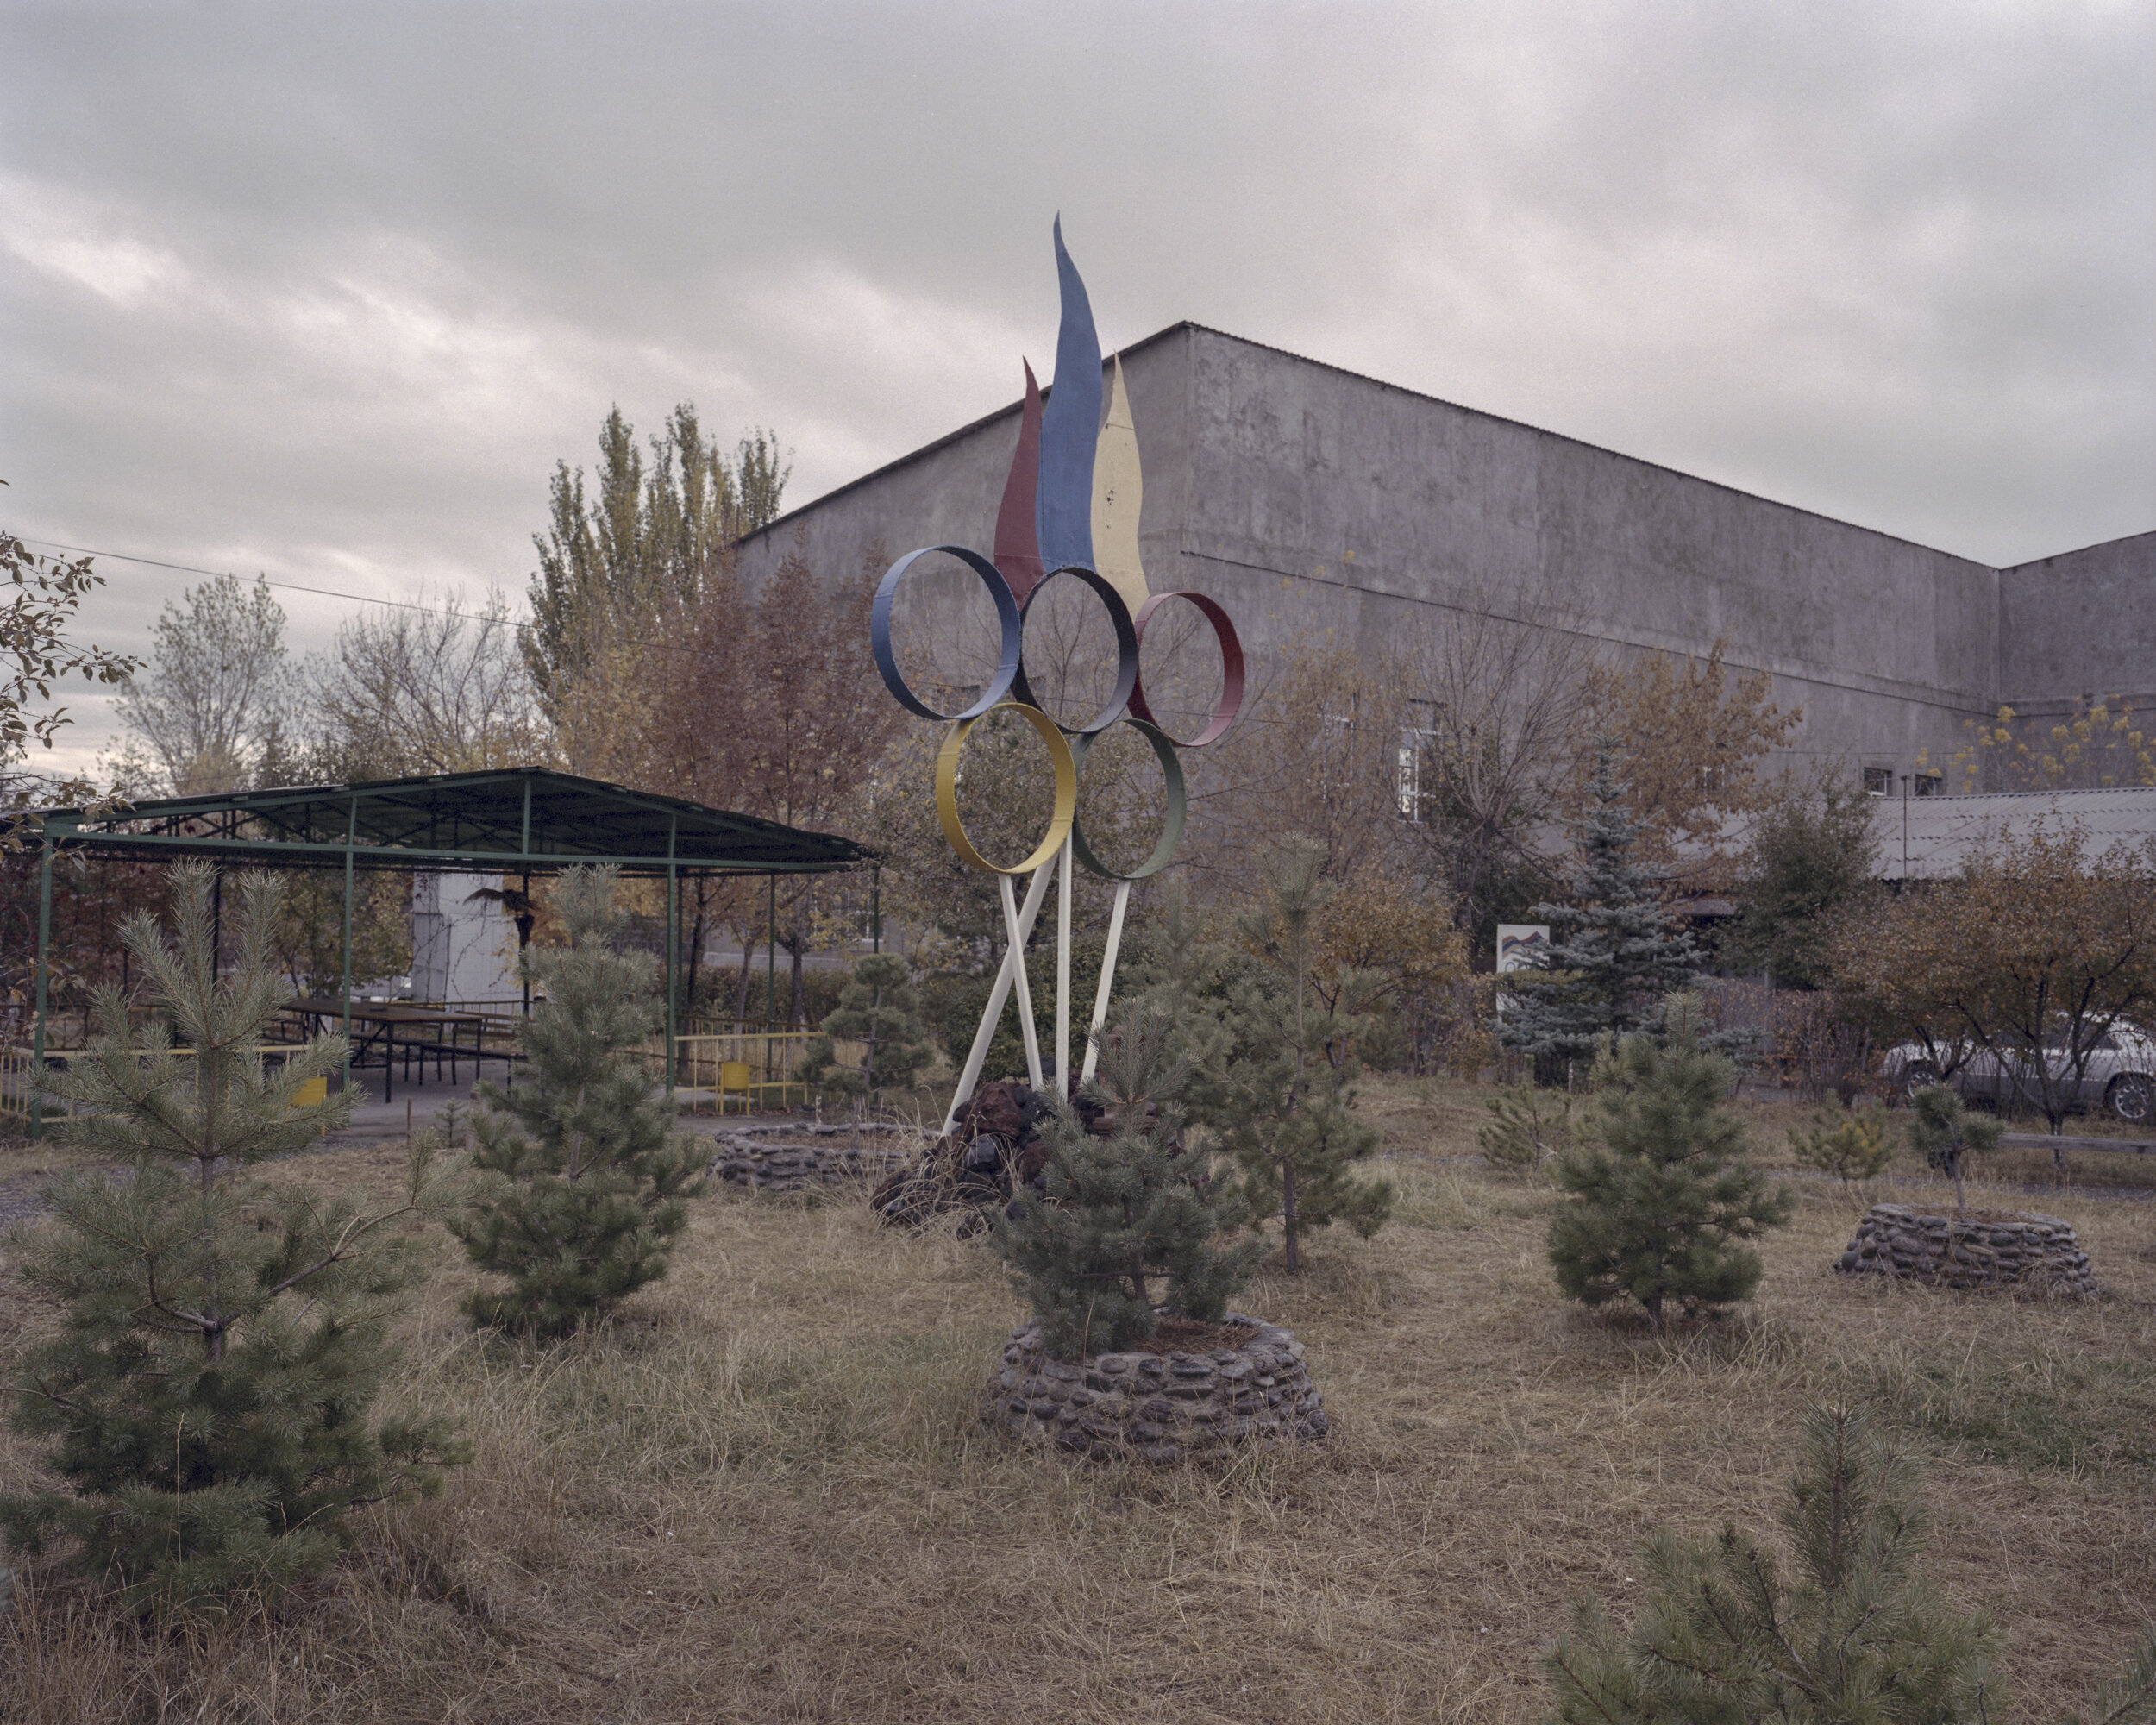   Almost in every town you can find the Olympic sign that proudly proclaims the success of Armenian sport culture.  Gyumri, Armenia, 2018  